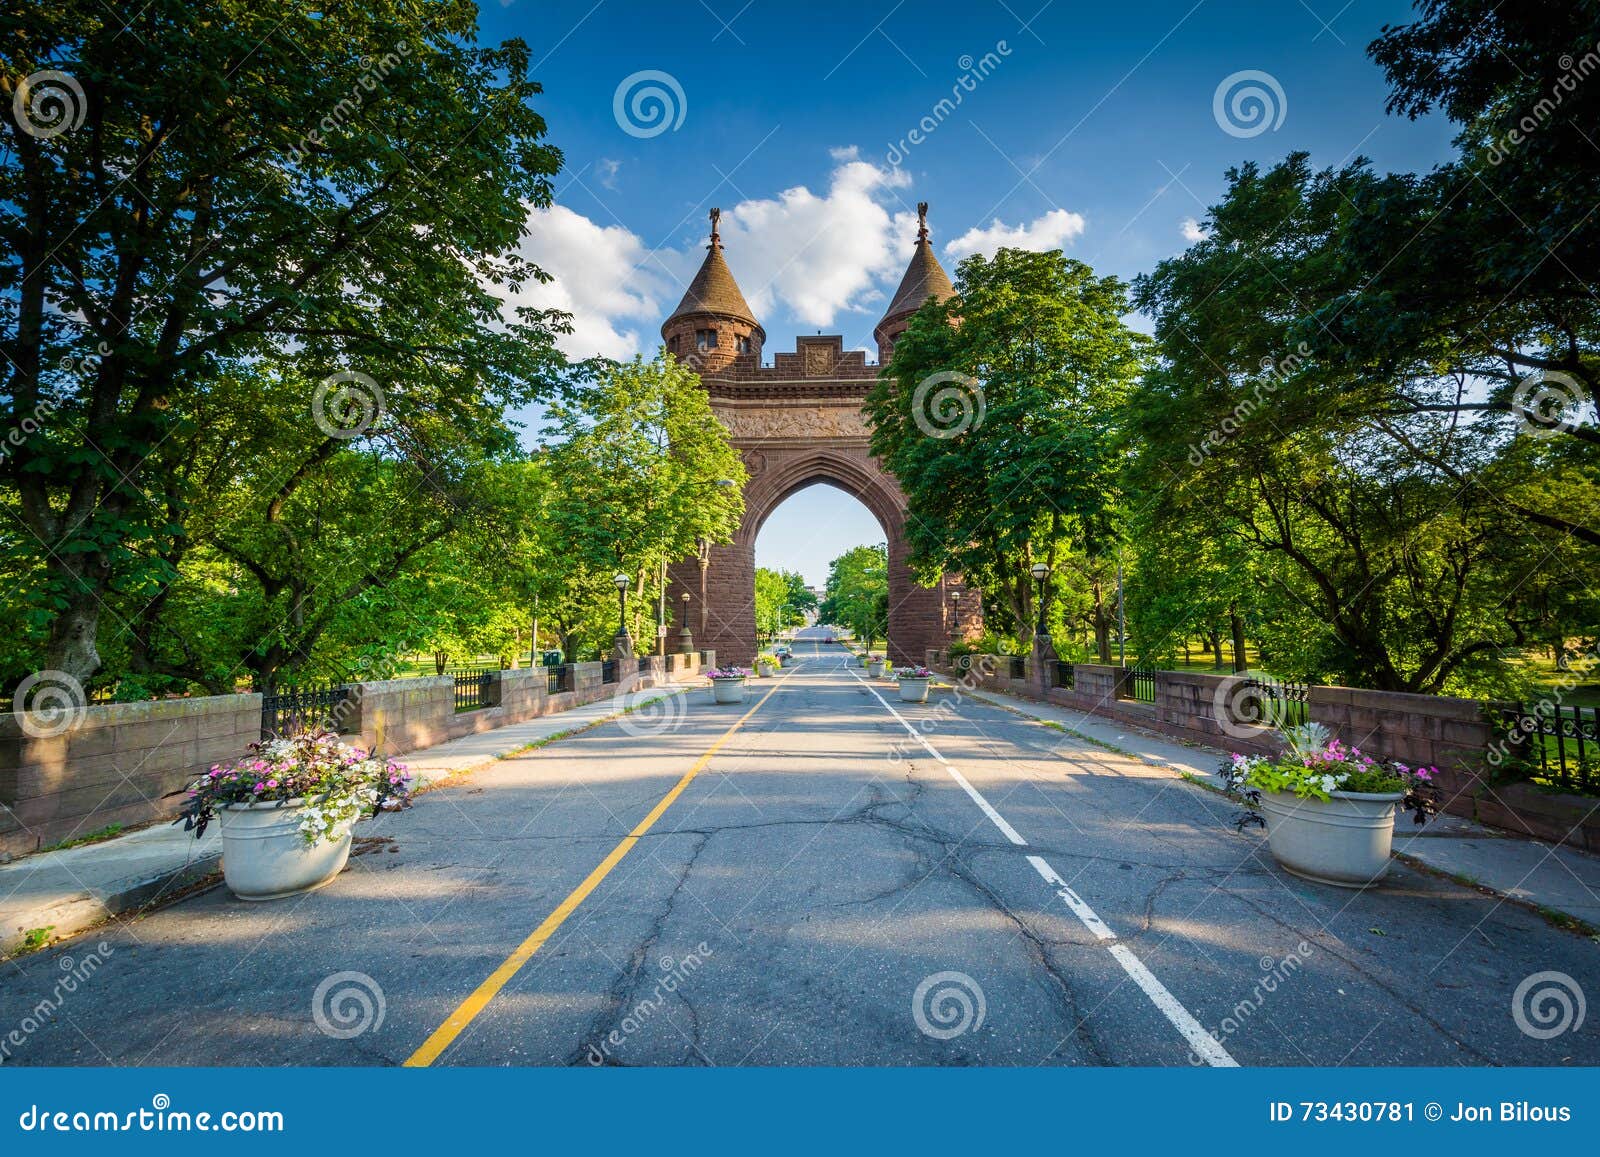 the soldiers and sailors memorial arch, in hartford, connecticut